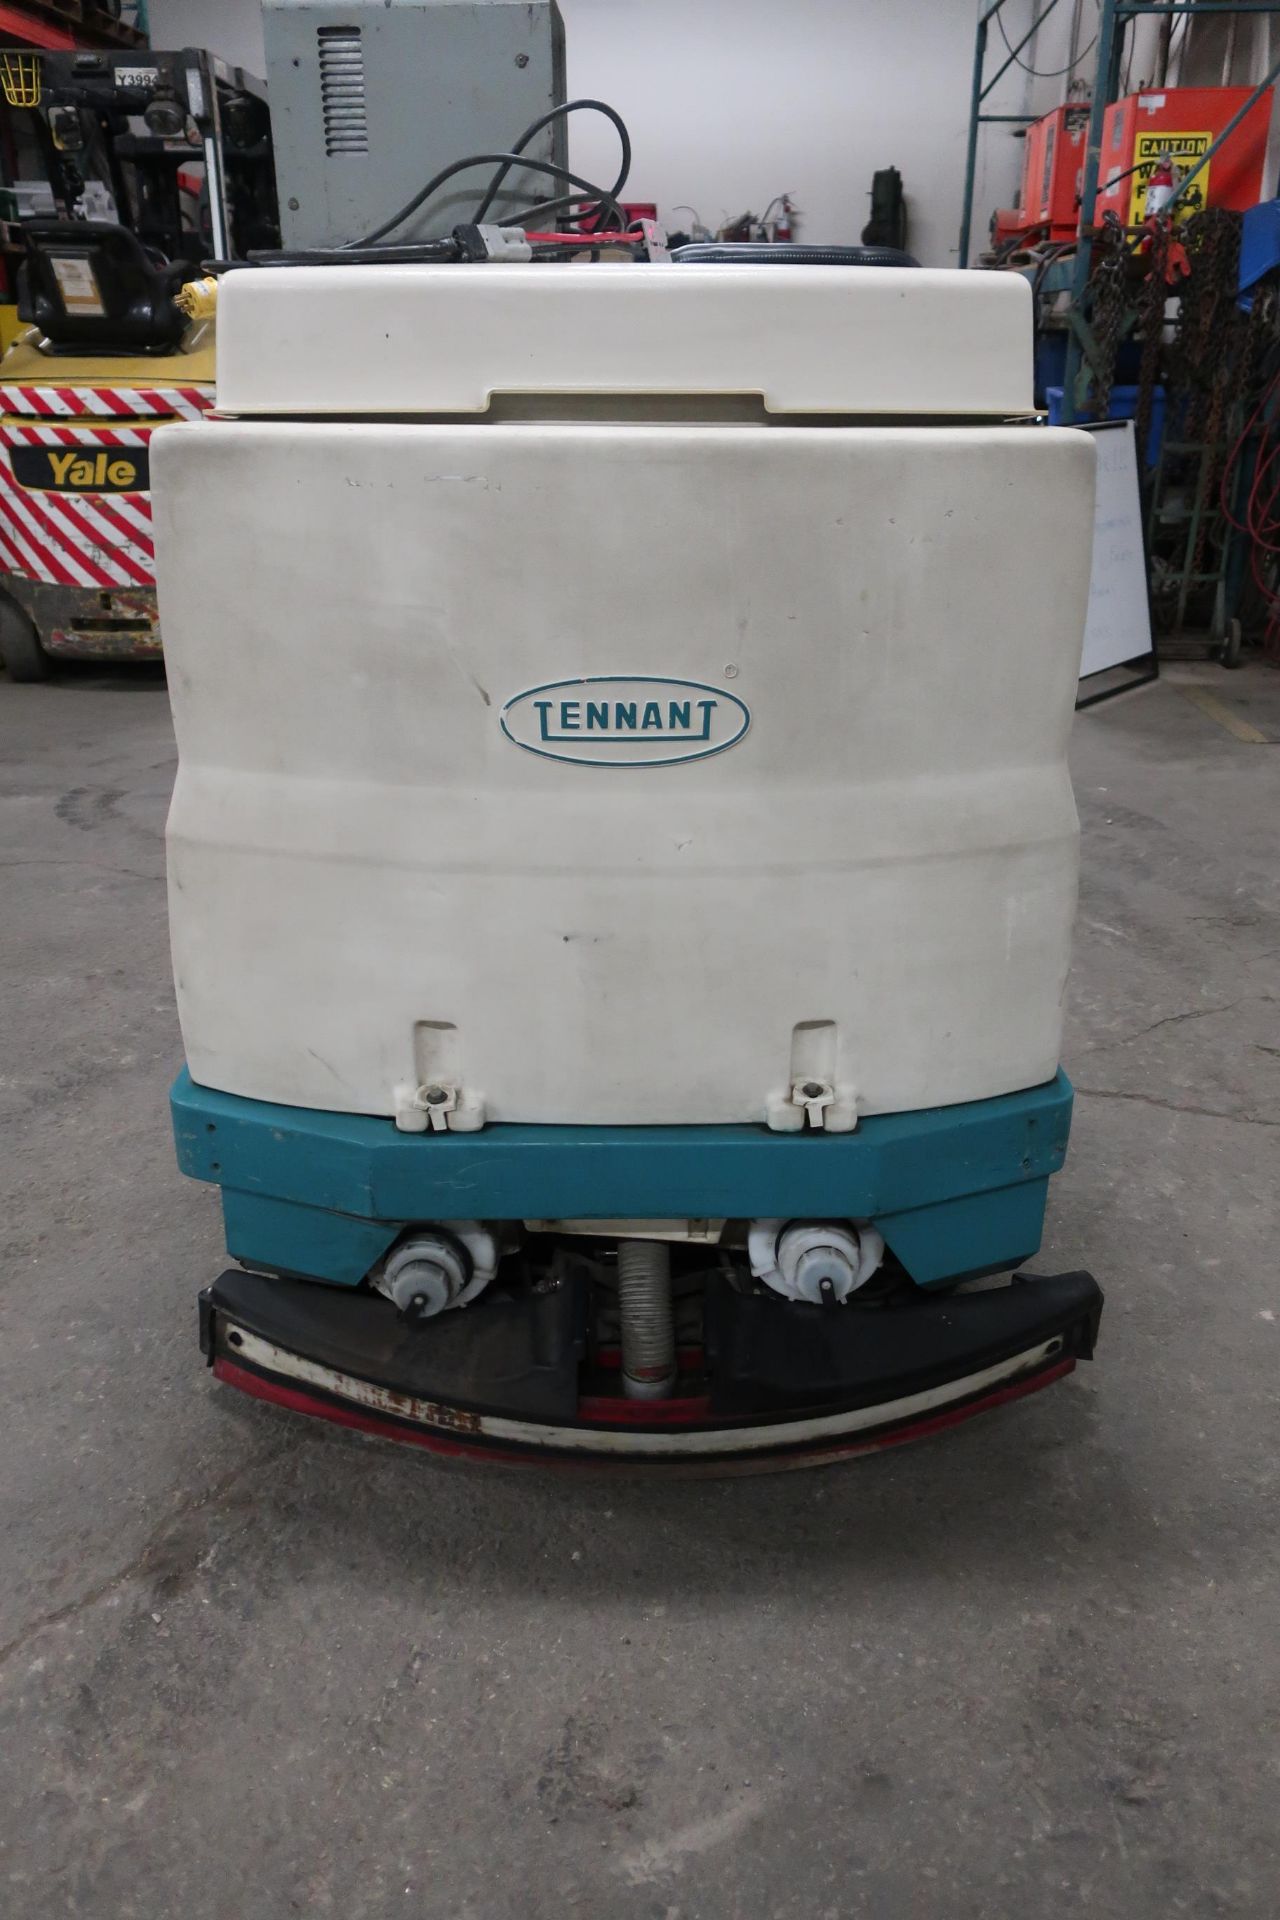 Tennant 510E Ride On Power Scrubber Sweeper Power-Operated Cleaning Machine - Electric with - Image 4 of 4